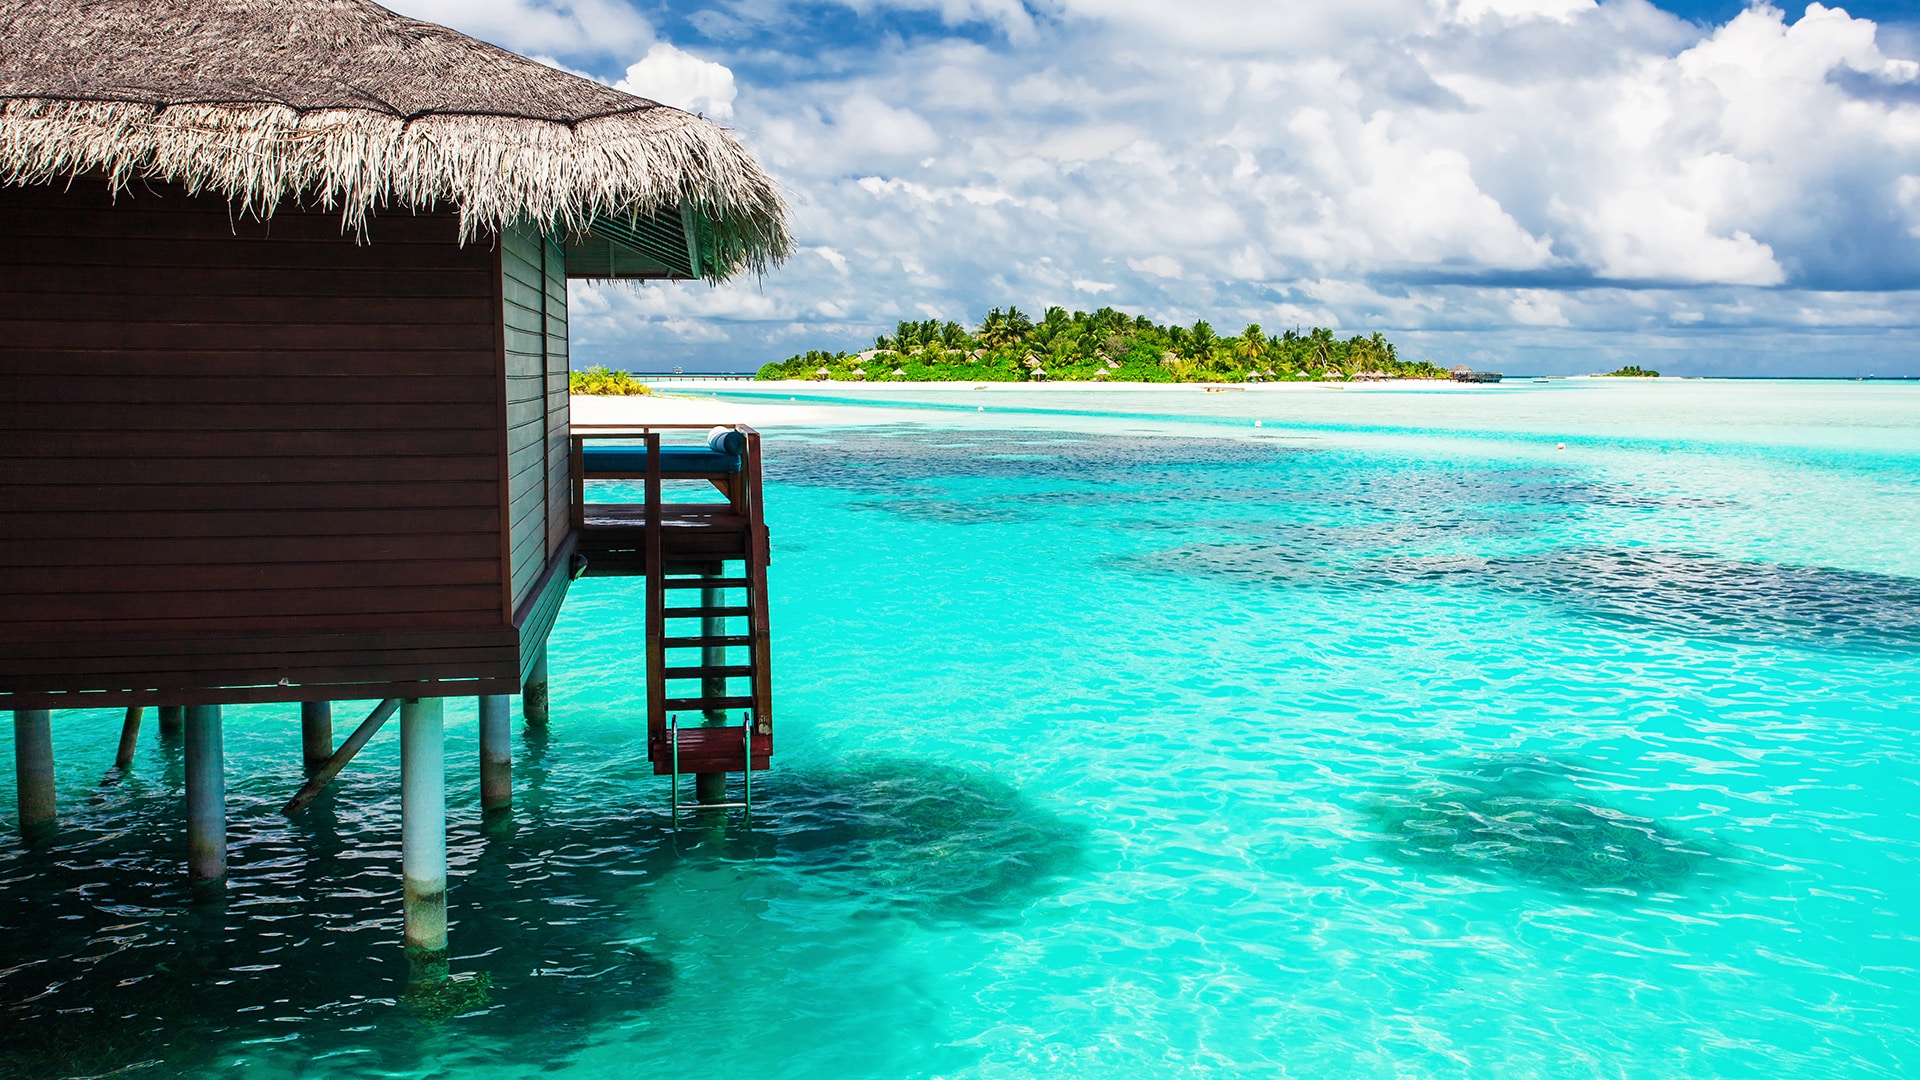 Over water bungalow with steps into amazing blue lagoon with island in distance